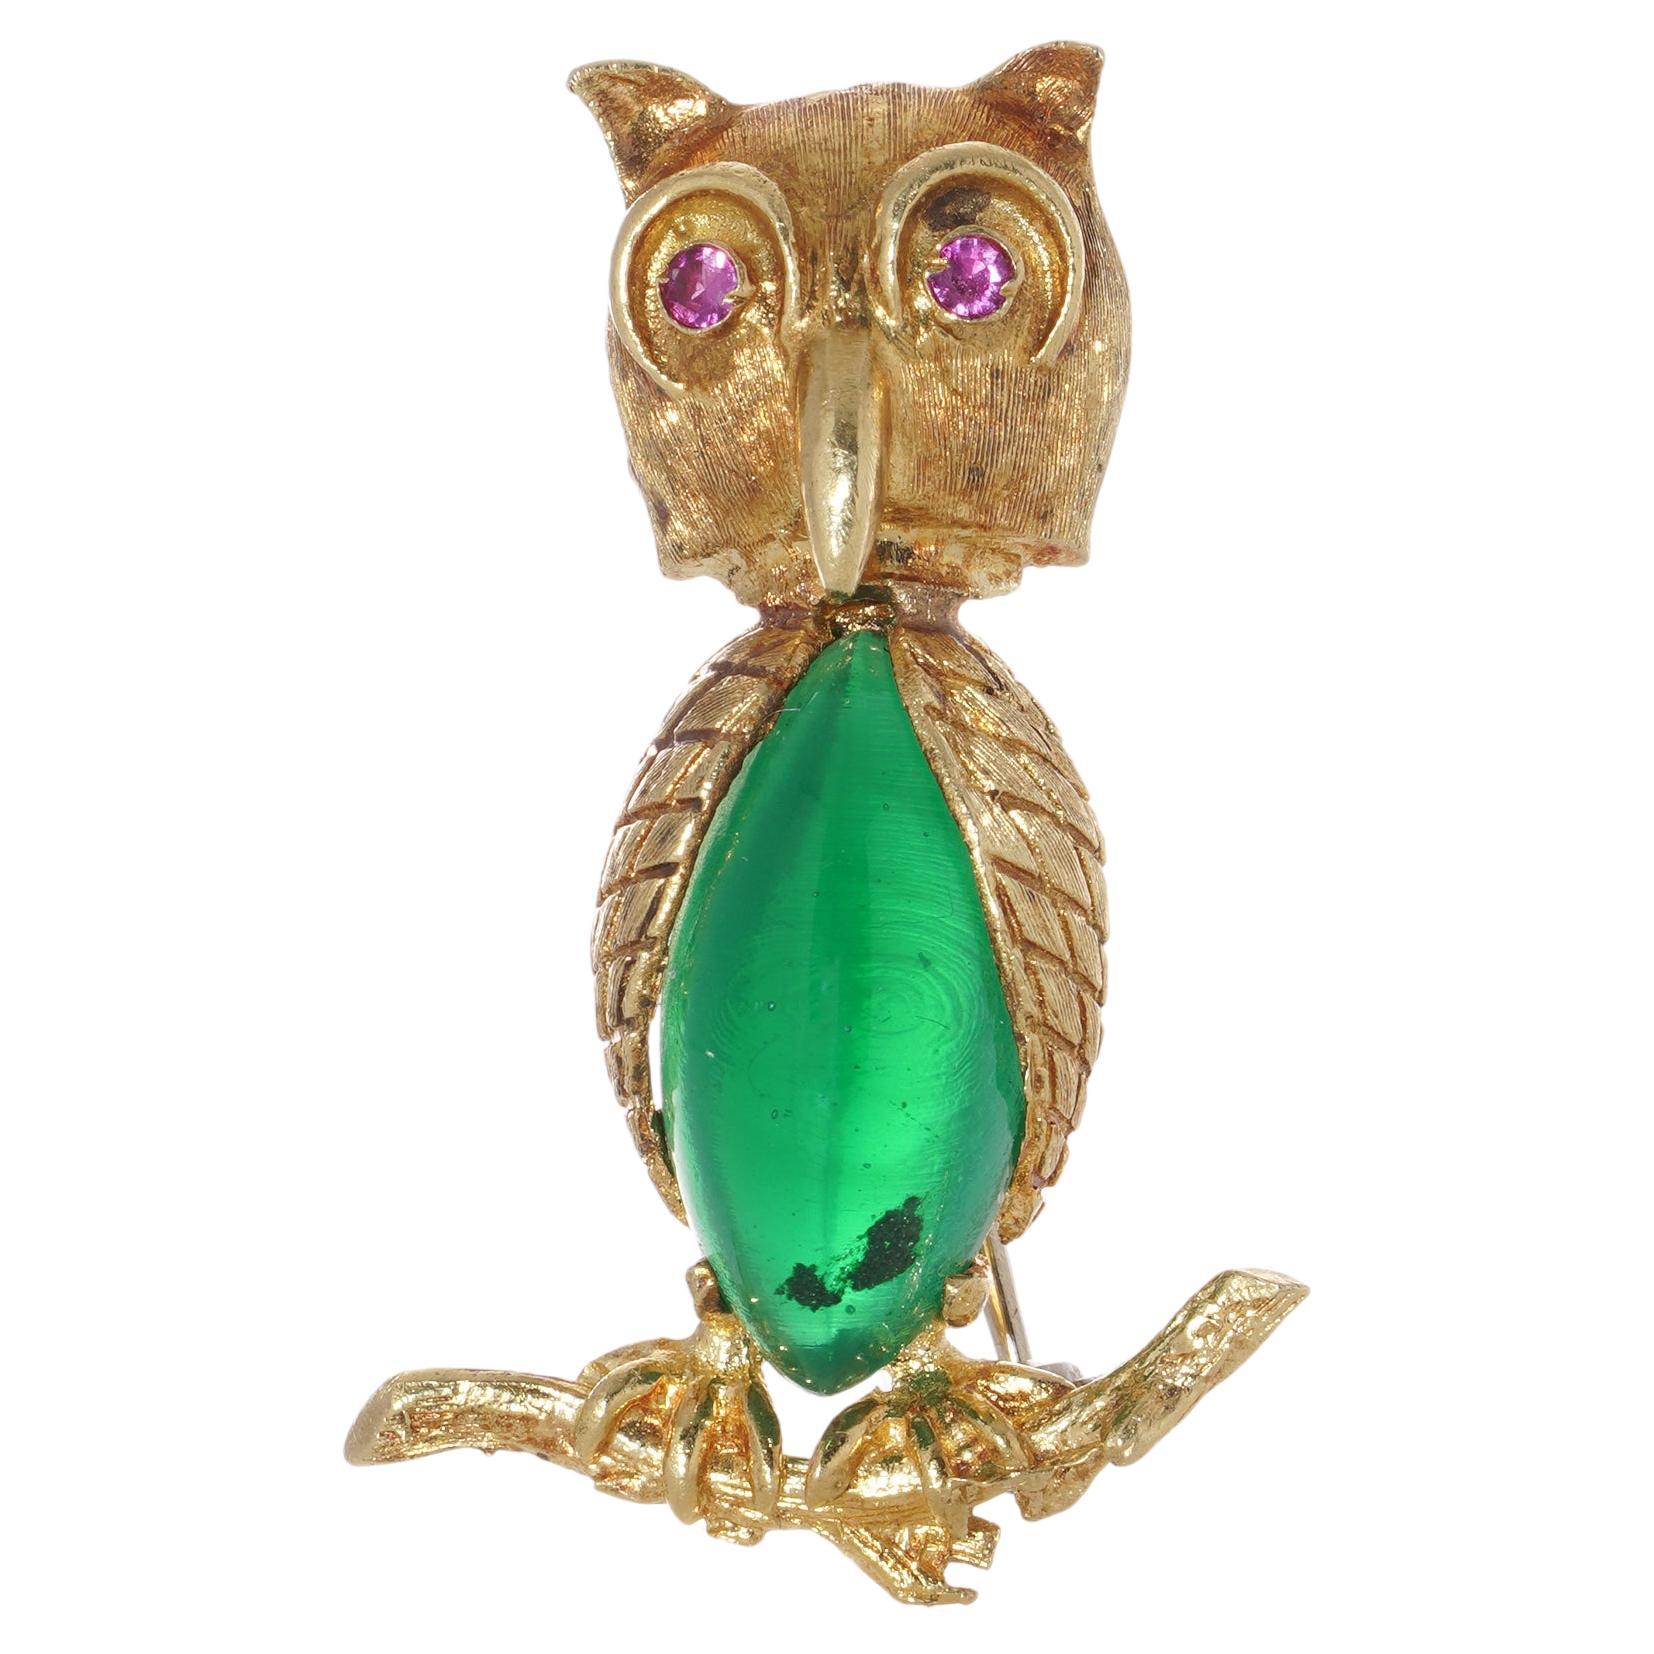 18kt gold owl brooch standing on a branch with coloured glass body and ruby eyes